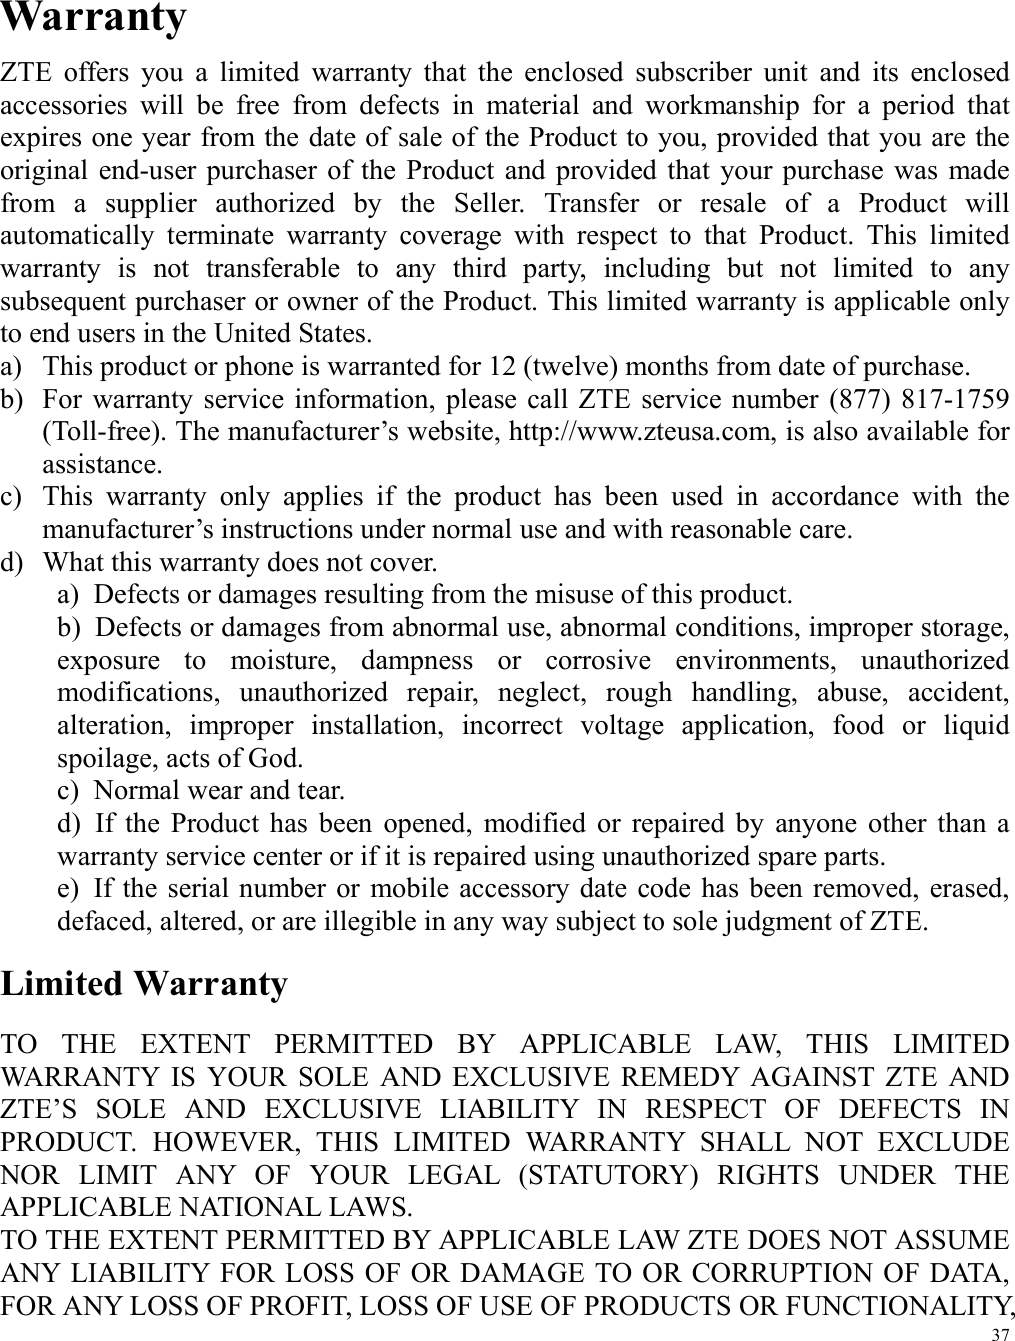 37  Warranty ZTE  offers  you  a  limited  warranty  that  the  enclosed  subscriber  unit  and  its  enclosed accessories  will  be  free  from  defects  in  material  and  workmanship  for  a  period  that expires one year from the date of sale of the Product to you, provided that you are the original end-user  purchaser  of the  Product and provided  that  your  purchase  was  made from  a  supplier  authorized  by  the  Seller.  Transfer  or  resale  of  a  Product  will automatically  terminate  warranty  coverage  with  respect  to  that  Product.  This  limited warranty  is  not  transferable  to  any  third  party,  including  but  not  limited  to  any subsequent purchaser or owner of the Product. This limited warranty is applicable only to end users in the United States. a) This product or phone is warranted for 12 (twelve) months from date of purchase. b) For  warranty service  information, please  call  ZTE  service number  (877)  817-1759 (Toll-free). The manufacturer’s website, http://www.zteusa.com, is also available for assistance. c) This  warranty  only  applies  if  the  product  has  been  used  in  accordance  with  the manufacturer’s instructions under normal use and with reasonable care. d) What this warranty does not cover. a)  Defects or damages resulting from the misuse of this product. b)  Defects or damages from abnormal use, abnormal conditions, improper storage, exposure  to  moisture,  dampness  or  corrosive  environments,  unauthorized modifications,  unauthorized  repair,  neglect,  rough  handling,  abuse,  accident, alteration,  improper  installation,  incorrect  voltage  application,  food  or  liquid spoilage, acts of God. c)  Normal wear and tear. d)  If  the  Product  has  been  opened,  modified  or  repaired  by  anyone  other  than  a warranty service center or if it is repaired using unauthorized spare parts. e)  If the serial number  or  mobile accessory  date  code  has been removed,  erased, defaced, altered, or are illegible in any way subject to sole judgment of ZTE. Limited Warranty TO  THE  EXTENT  PERMITTED  BY  APPLICABLE  LAW,  THIS  LIMITED WARRANTY  IS  YOUR  SOLE  AND  EXCLUSIVE  REMEDY  AGAINST  ZTE  AND ZTE’S  SOLE  AND  EXCLUSIVE  LIABILITY  IN  RESPECT  OF  DEFECTS  IN PRODUCT.  HOWEVER,  THIS  LIMITED  WARRANTY  SHALL  NOT  EXCLUDE NOR  LIMIT  ANY  OF  YOUR  LEGAL  (STATUTORY)  RIGHTS  UNDER  THE APPLICABLE NATIONAL LAWS. TO THE EXTENT PERMITTED BY APPLICABLE LAW ZTE DOES NOT ASSUME ANY  LIABILITY  FOR LOSS OF OR DAMAGE TO OR CORRUPTION OF DATA, FOR ANY LOSS OF PROFIT, LOSS OF USE OF PRODUCTS OR FUNCTIONALITY, 